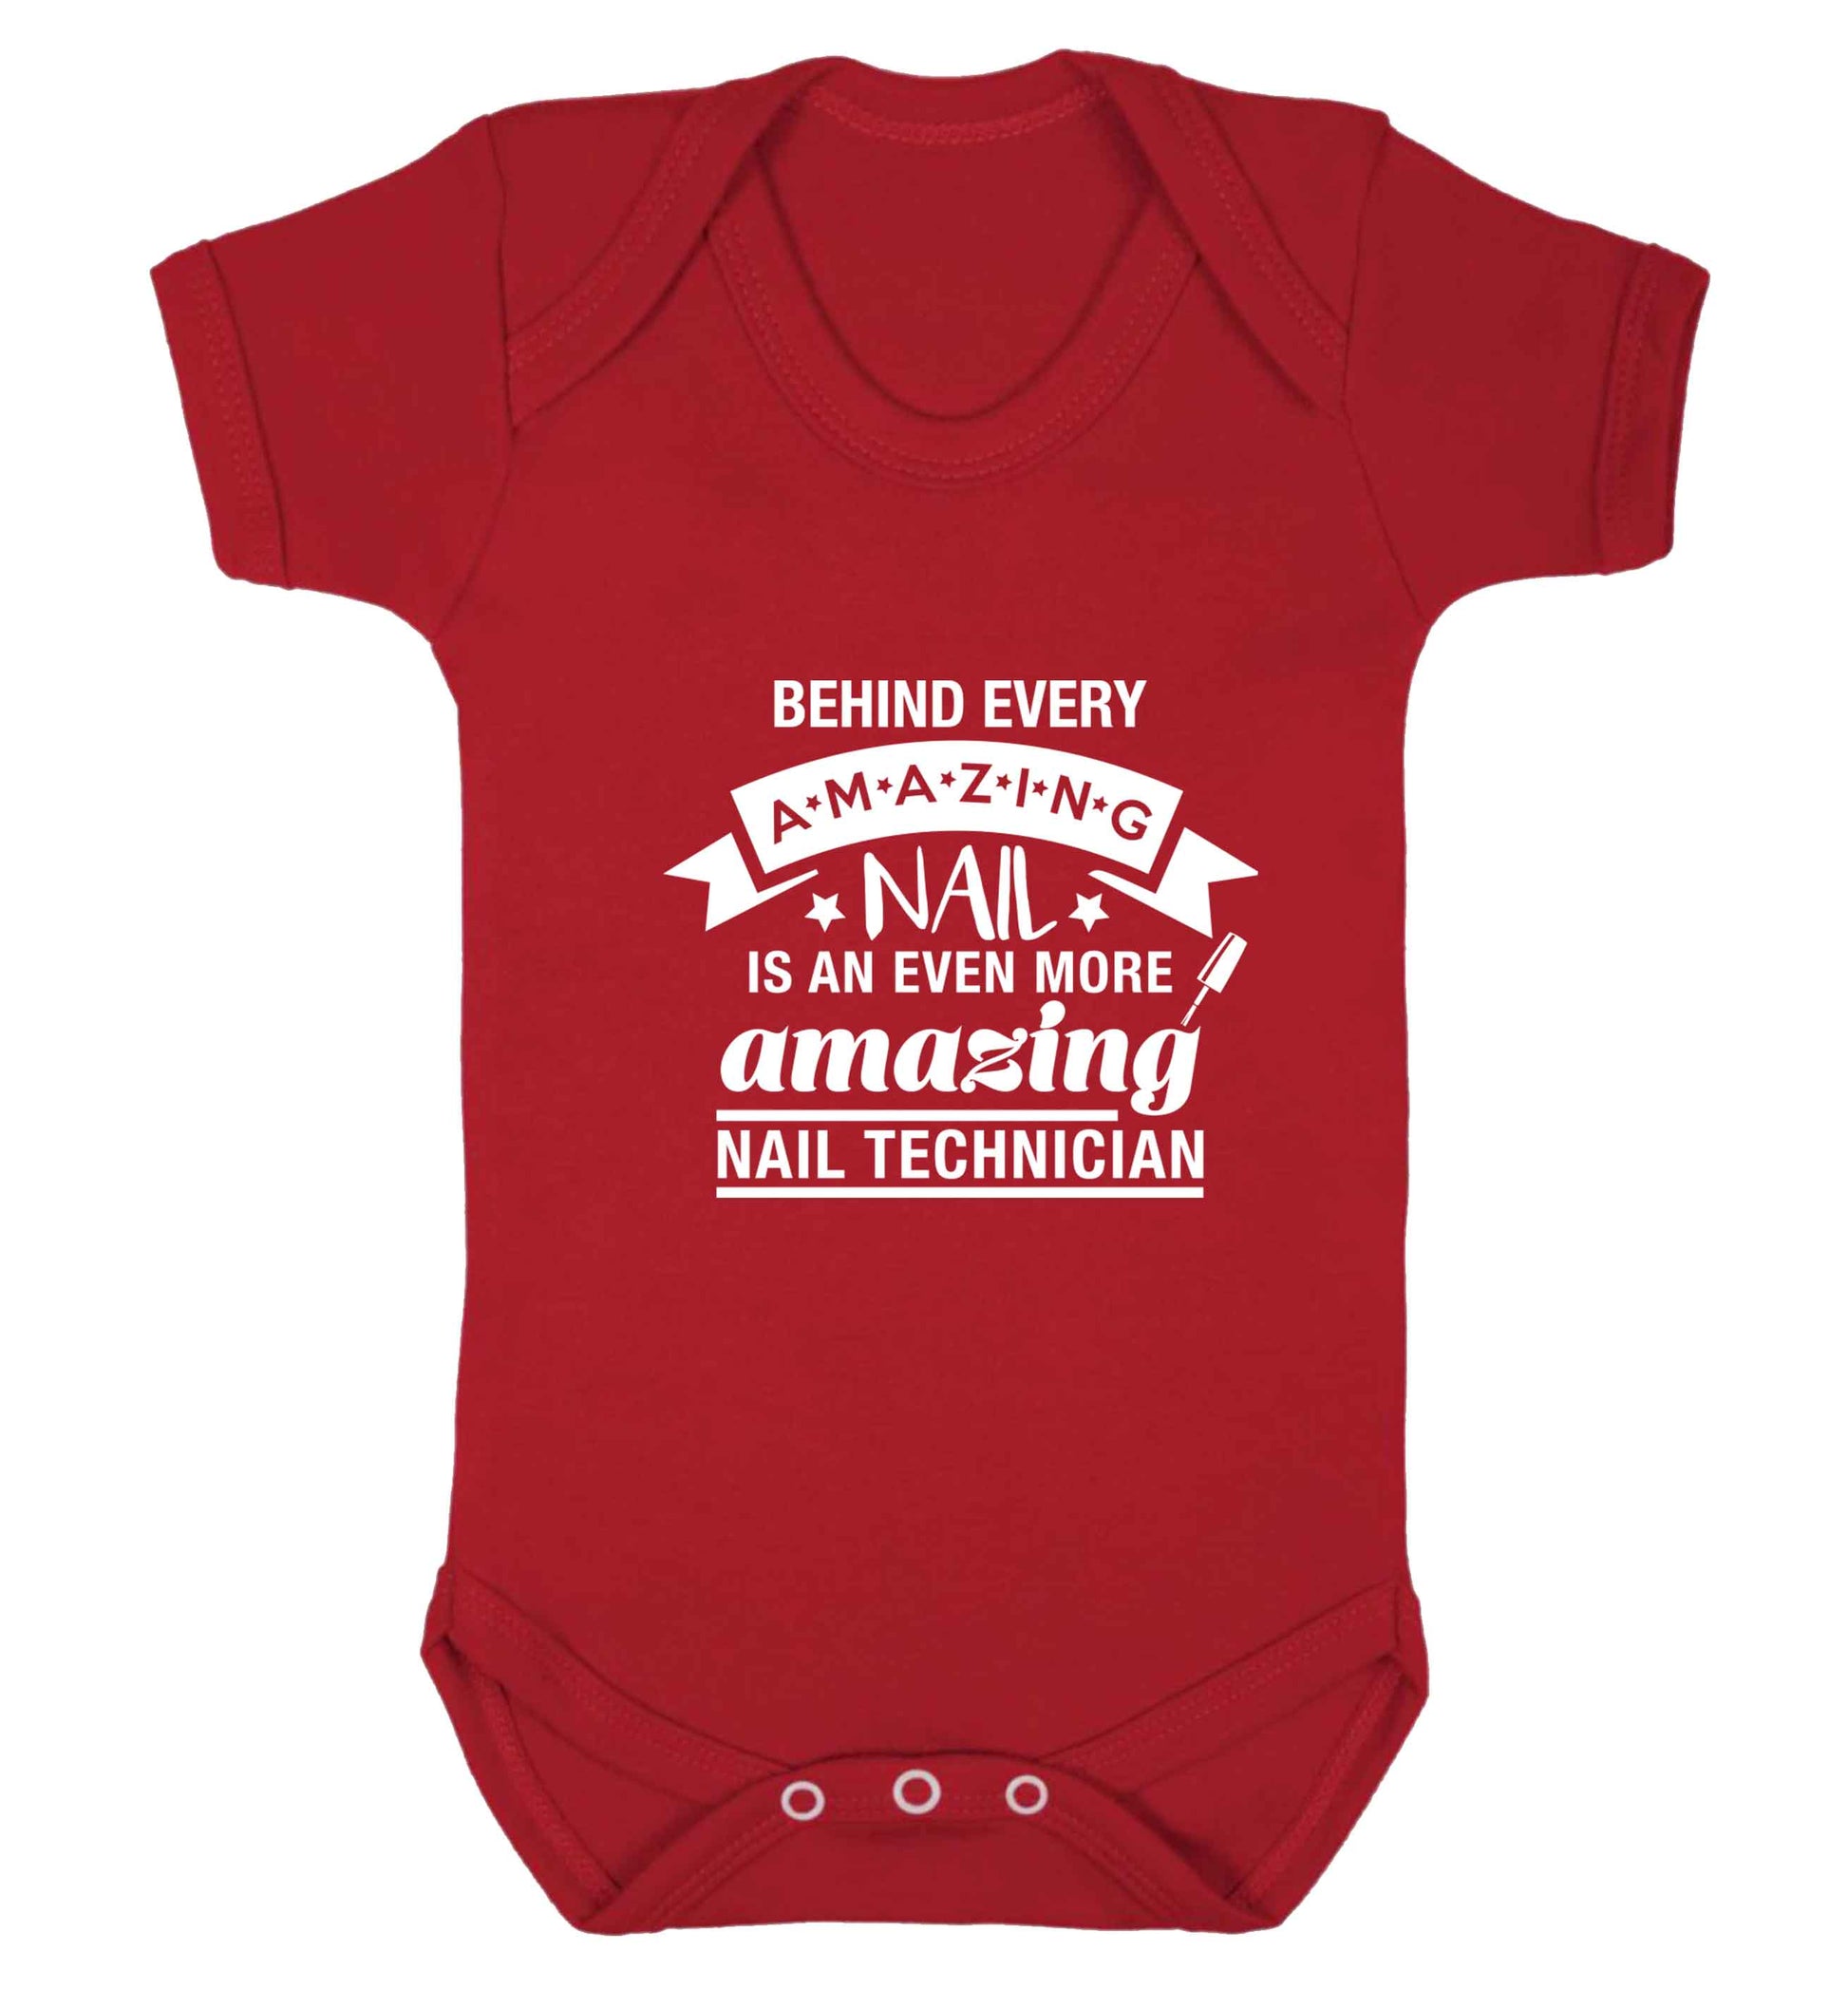 Behind every amazing nail is an even more amazing nail technician baby vest red 18-24 months